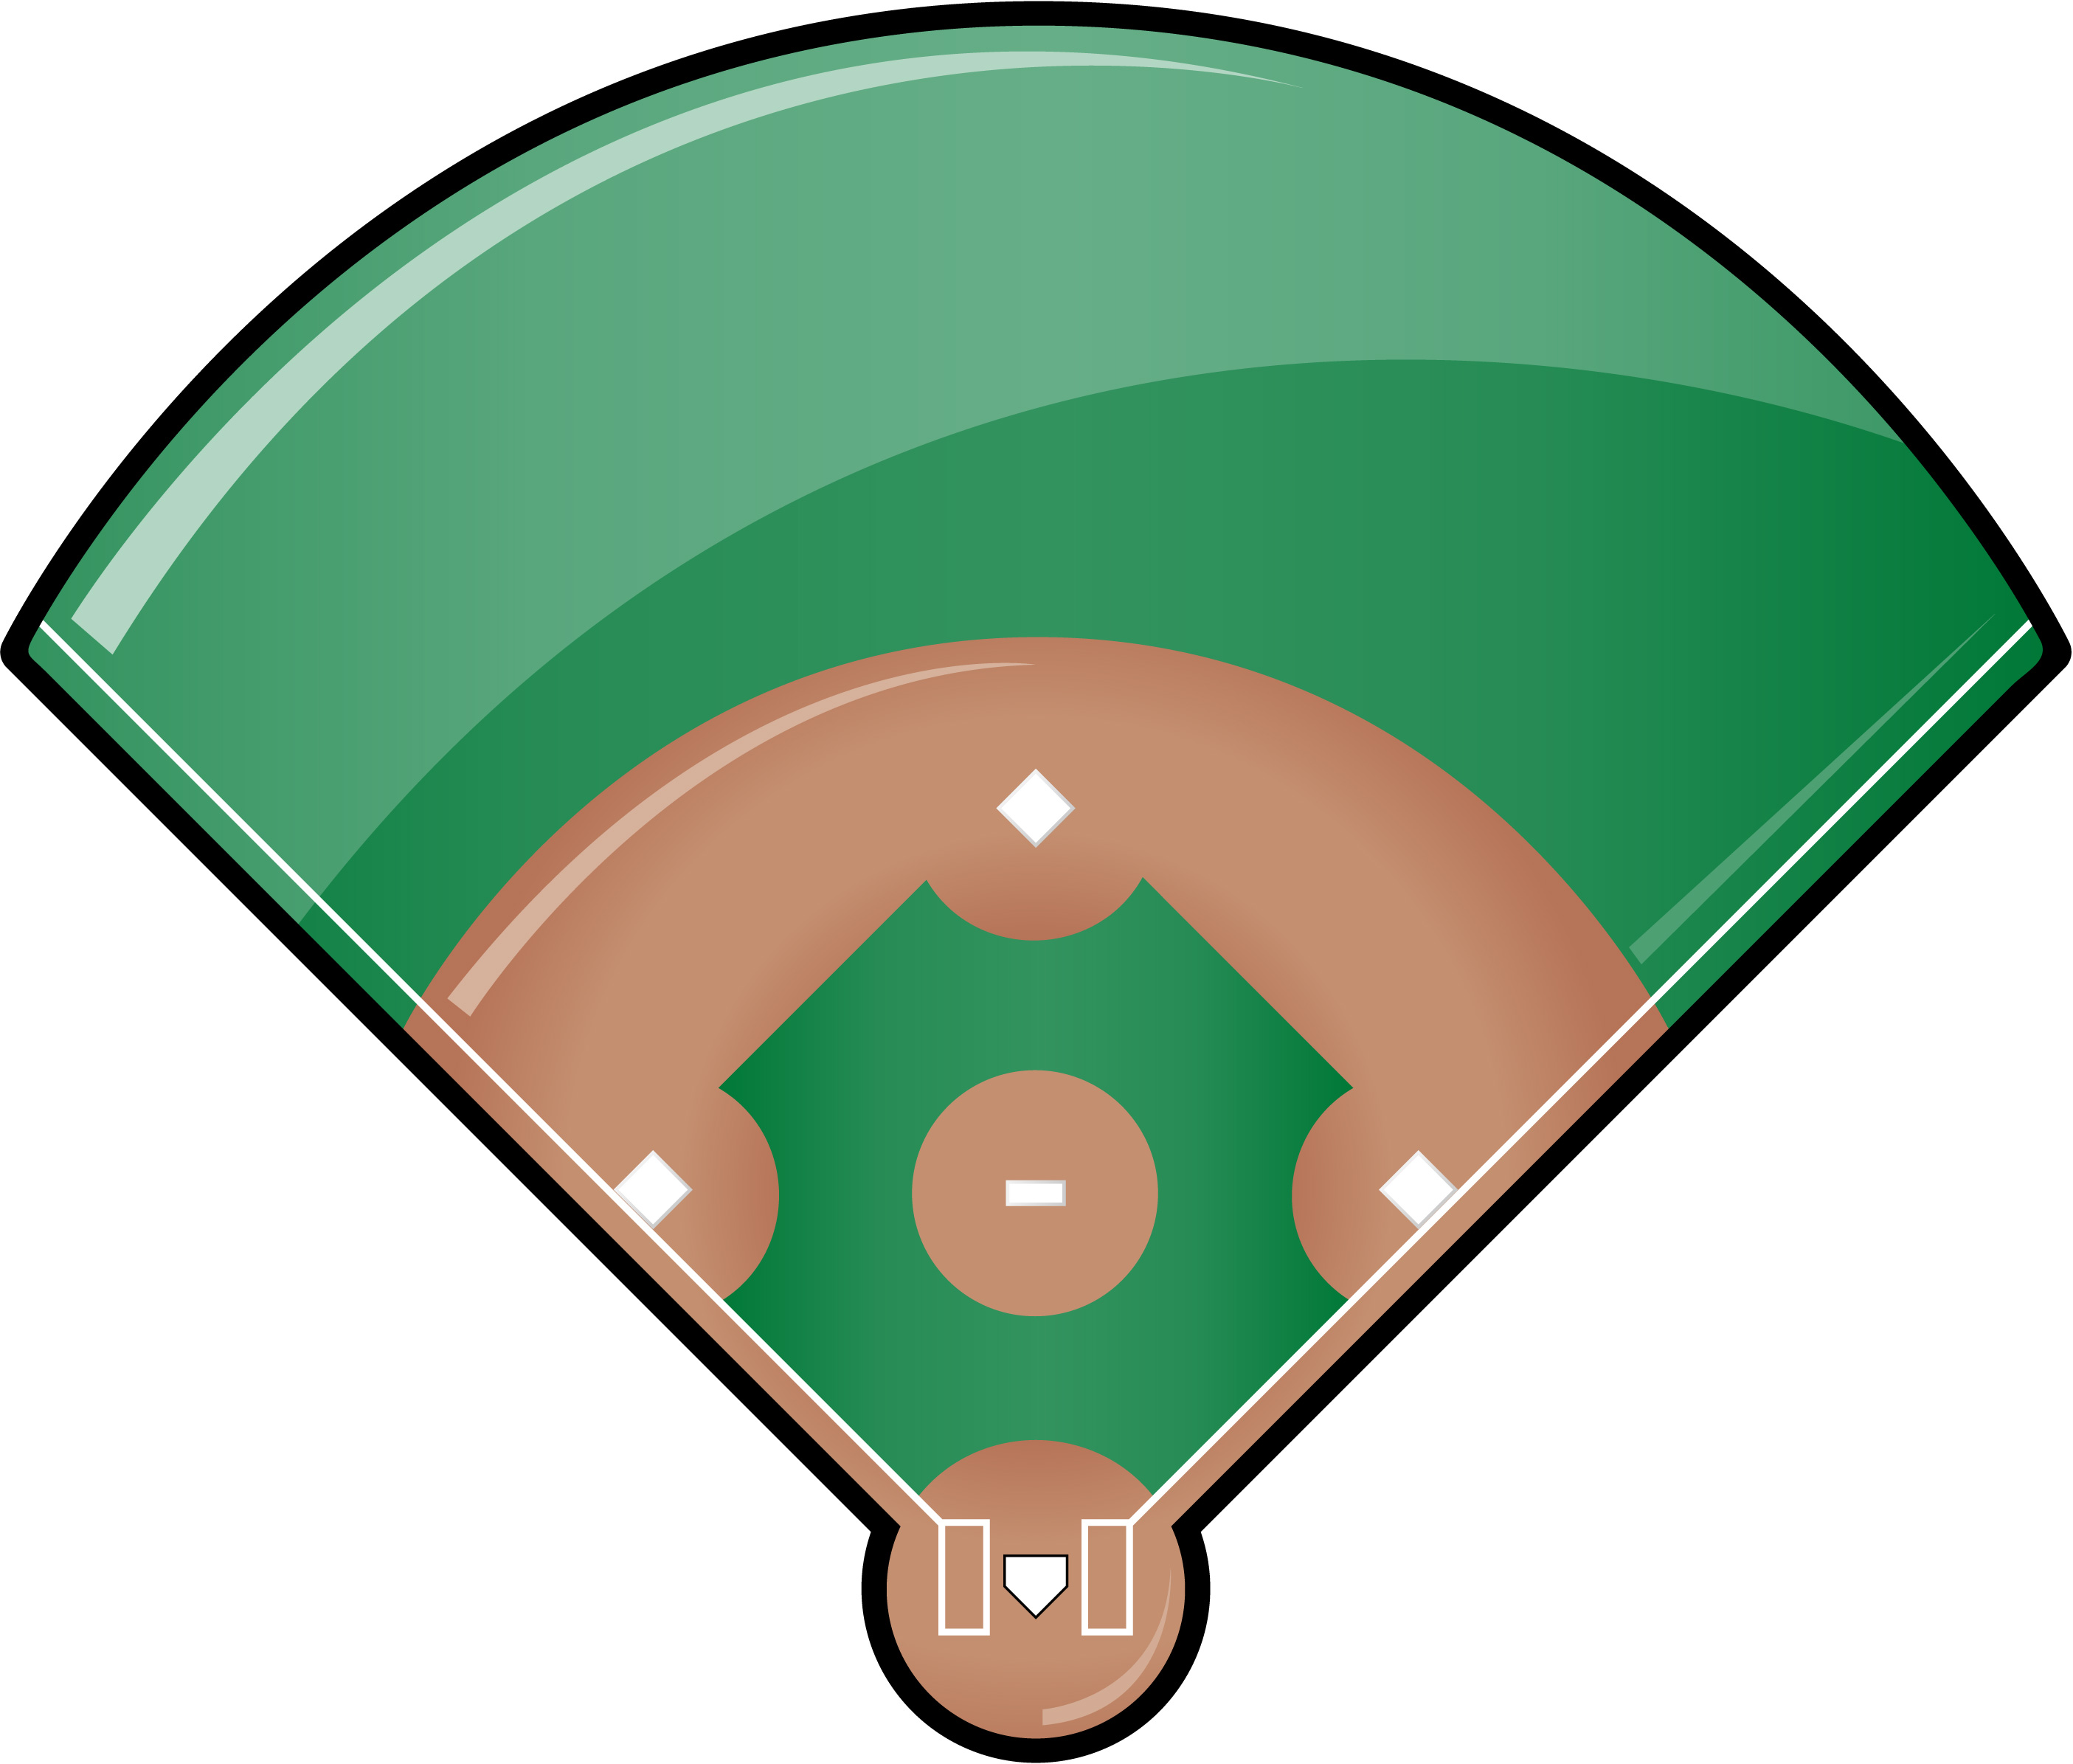 pictures of baseball fields - Template